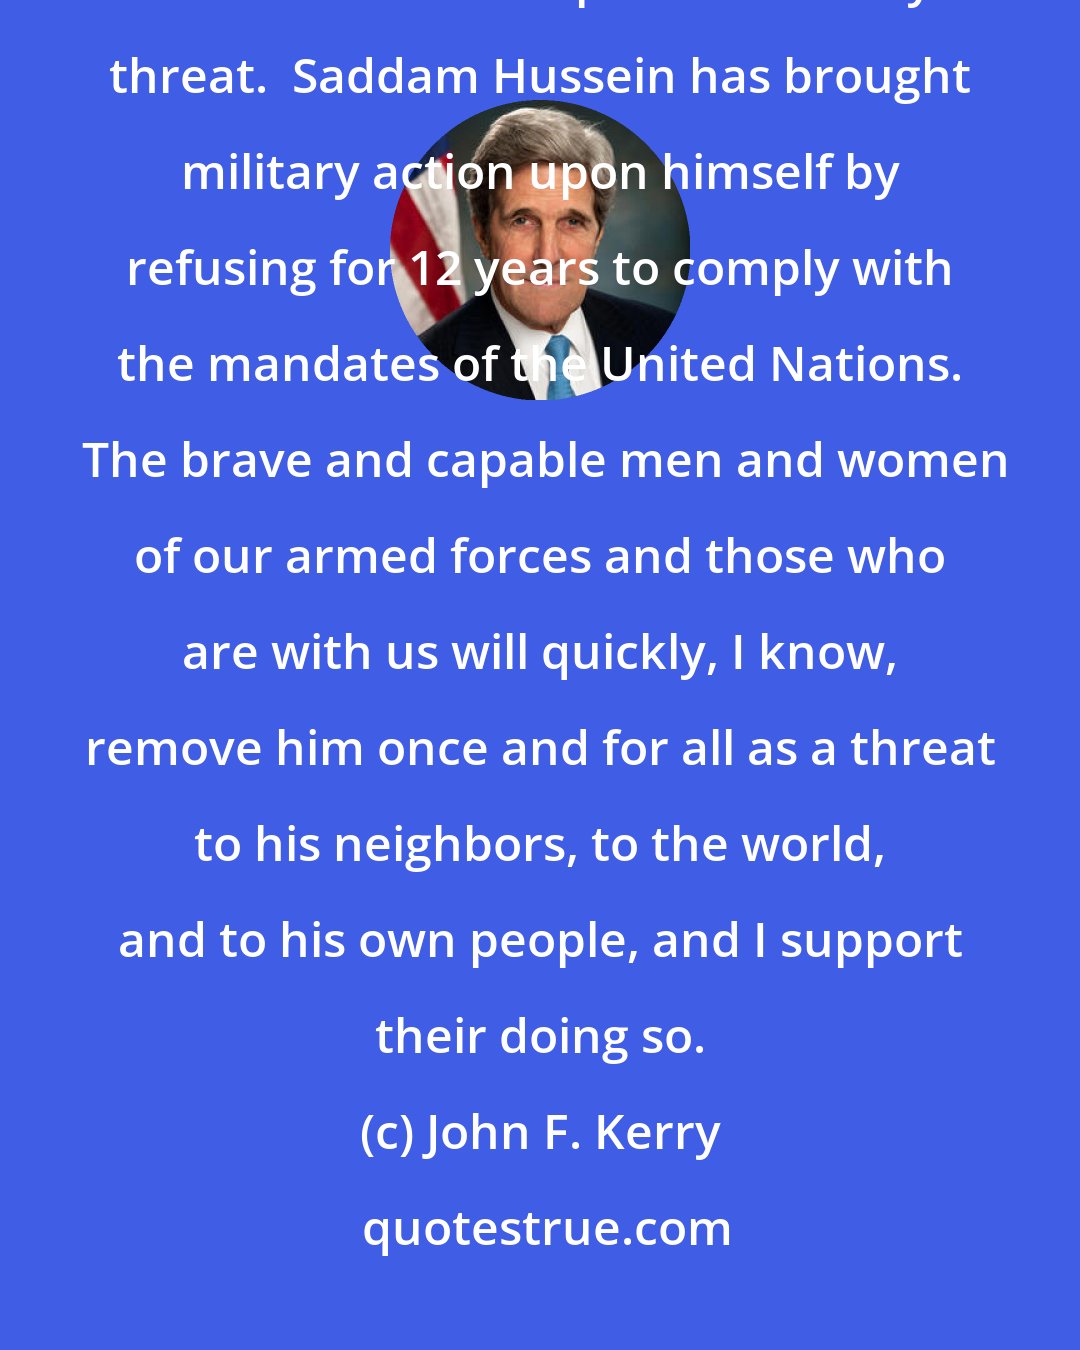 John F. Kerry: It is the duty of any president, in the final analysis, to defend this nation and dispel the security threat.  Saddam Hussein has brought military action upon himself by refusing for 12 years to comply with the mandates of the United Nations.  The brave and capable men and women of our armed forces and those who are with us will quickly, I know, remove him once and for all as a threat to his neighbors, to the world, and to his own people, and I support their doing so.